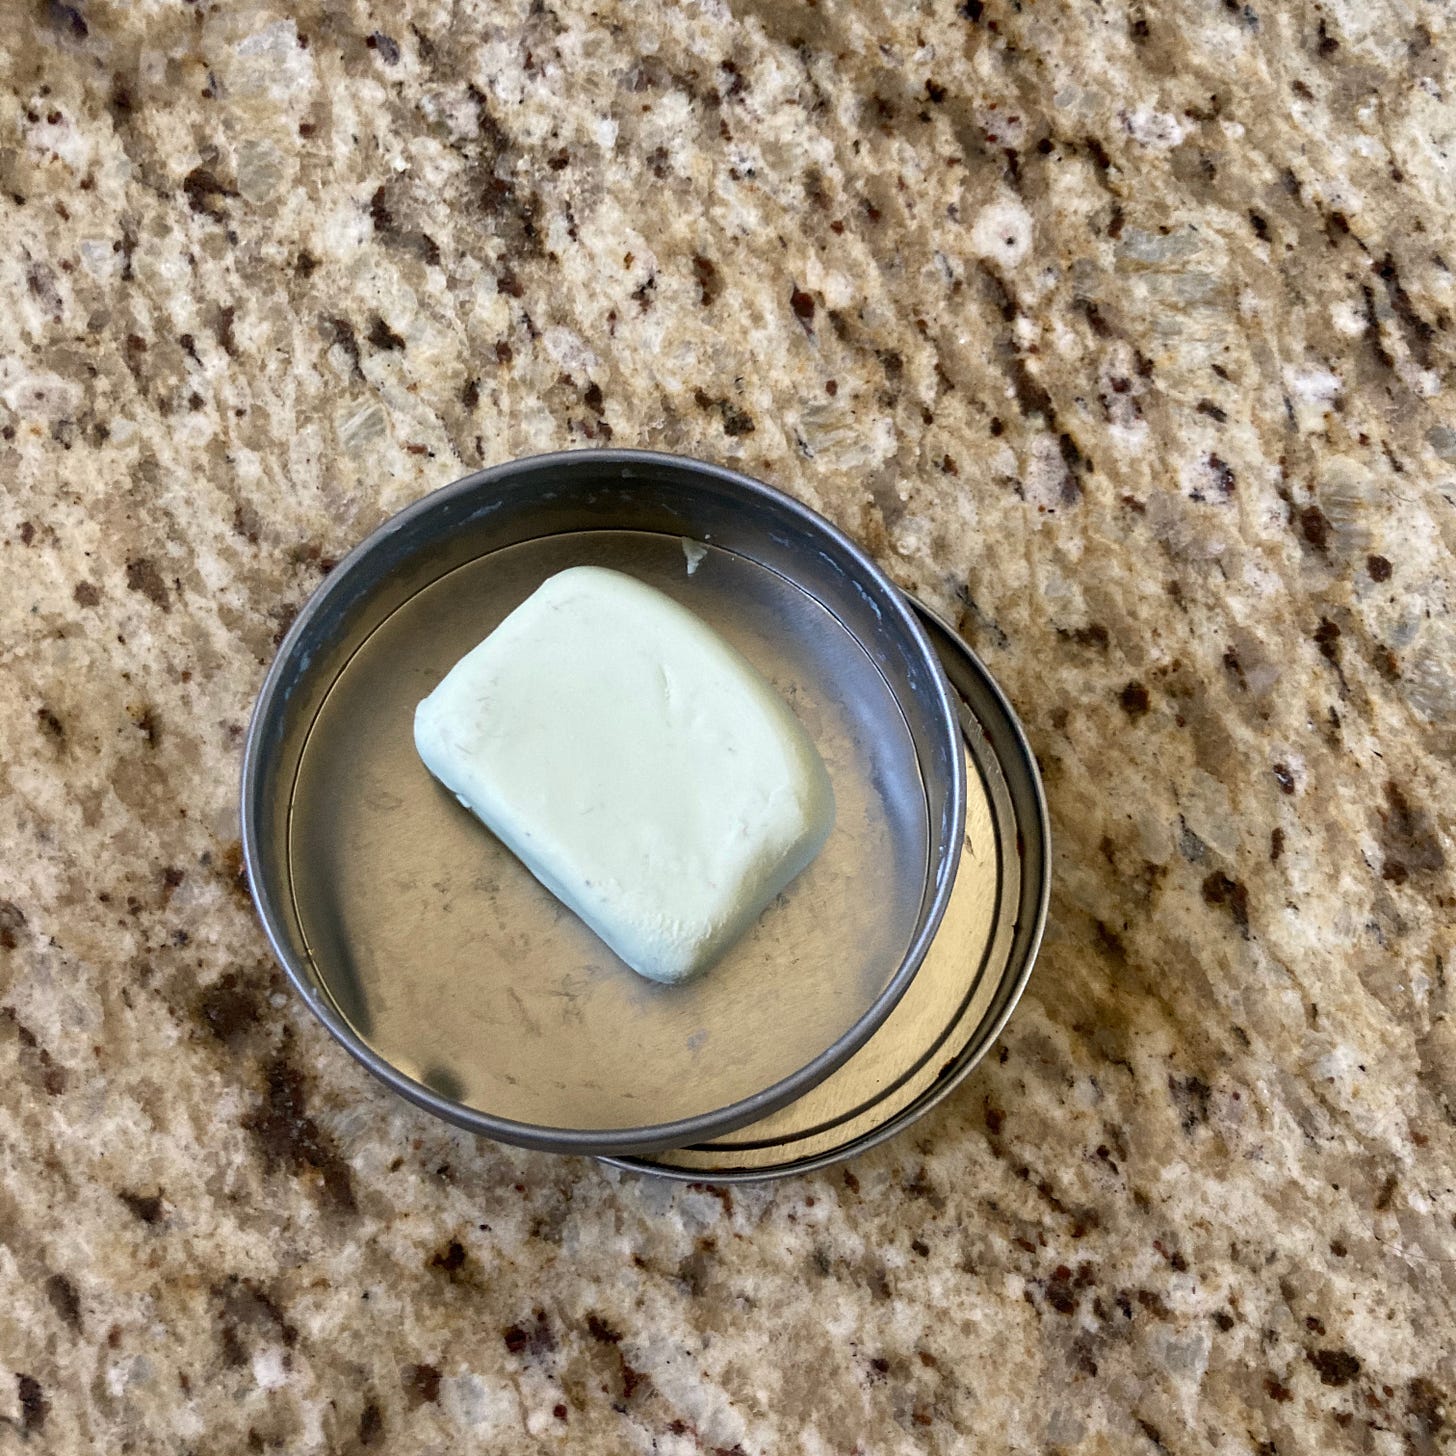 Visual description: A once-square light blue bar of solid deodorant with a rubbed-away rounded edge is held in a round, open metal container on a gray and brown granite countertop.